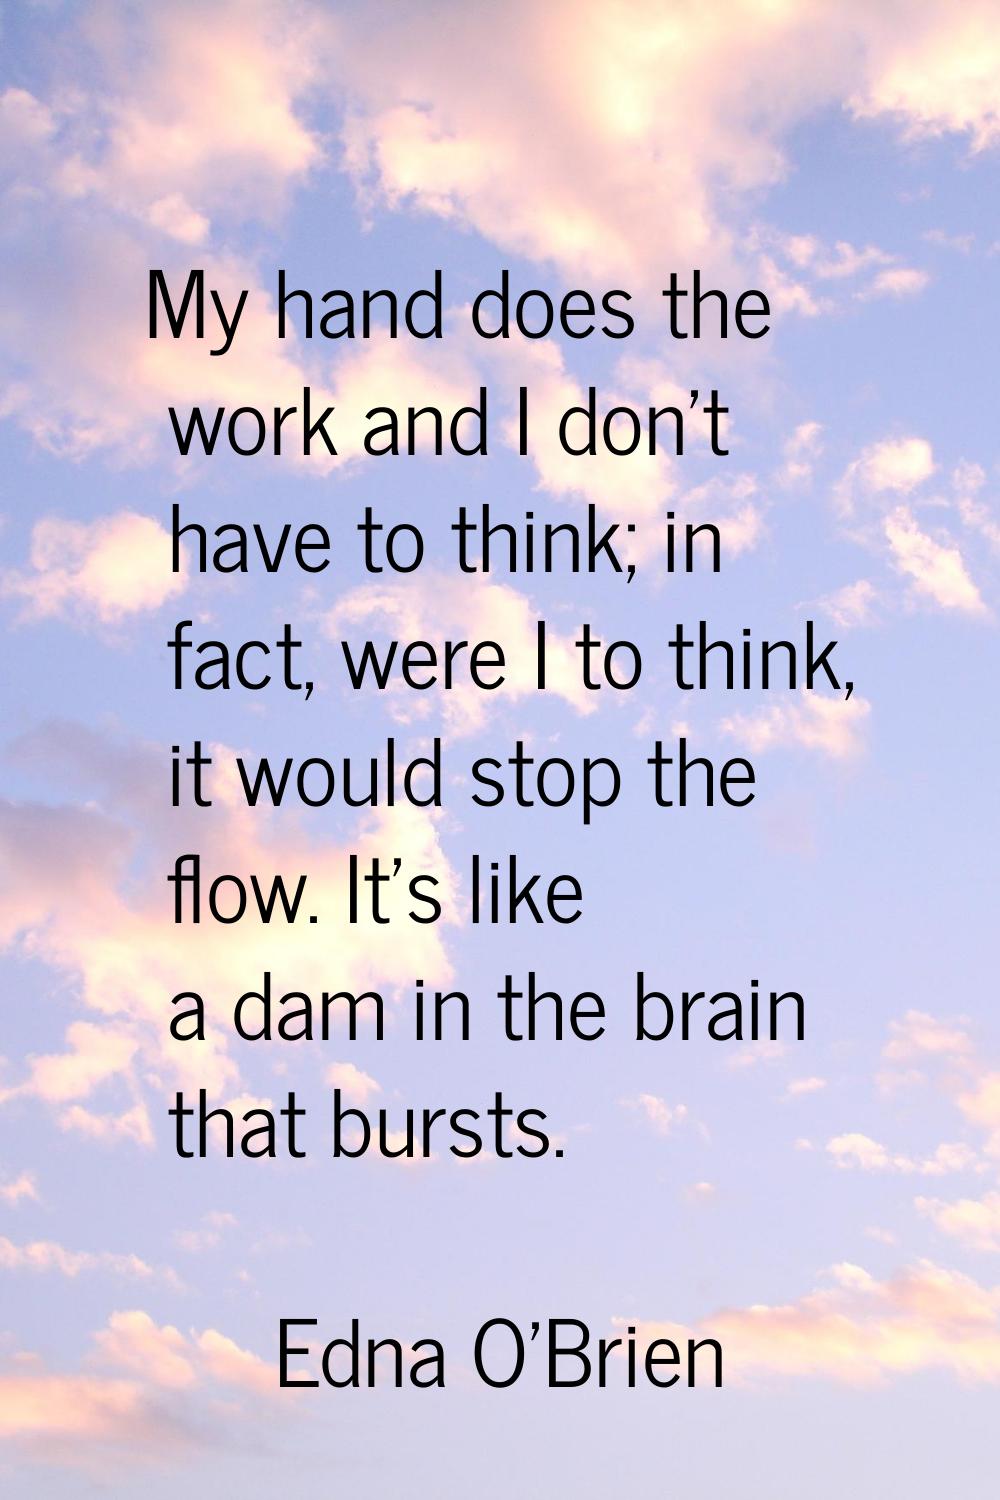 My hand does the work and I don't have to think; in fact, were I to think, it would stop the flow. 